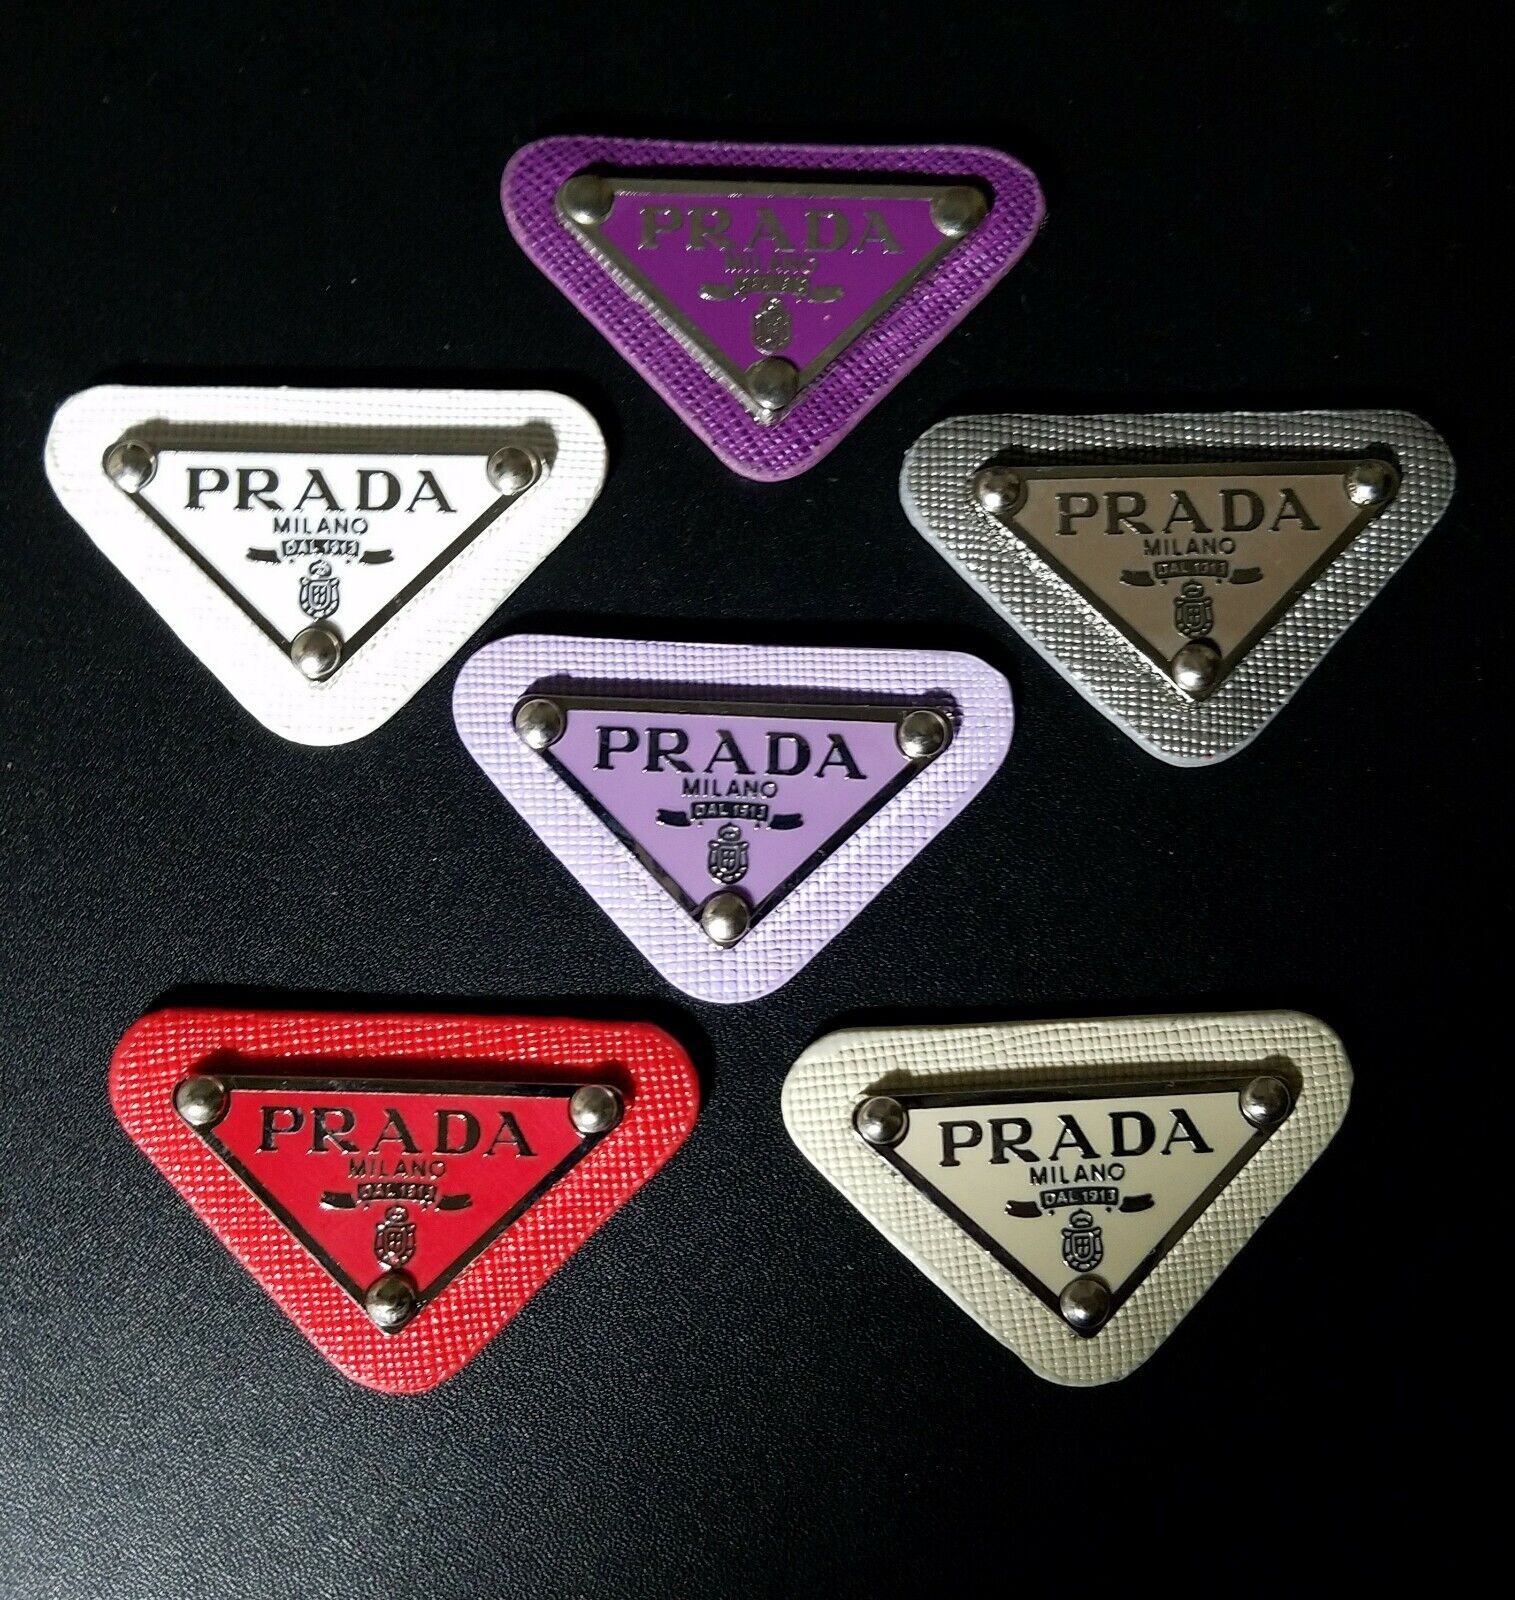 (ONE PIECE ONLY) Of 6 Col. EMBLEM Prada Milano Logo Little Metal Triangle Plate